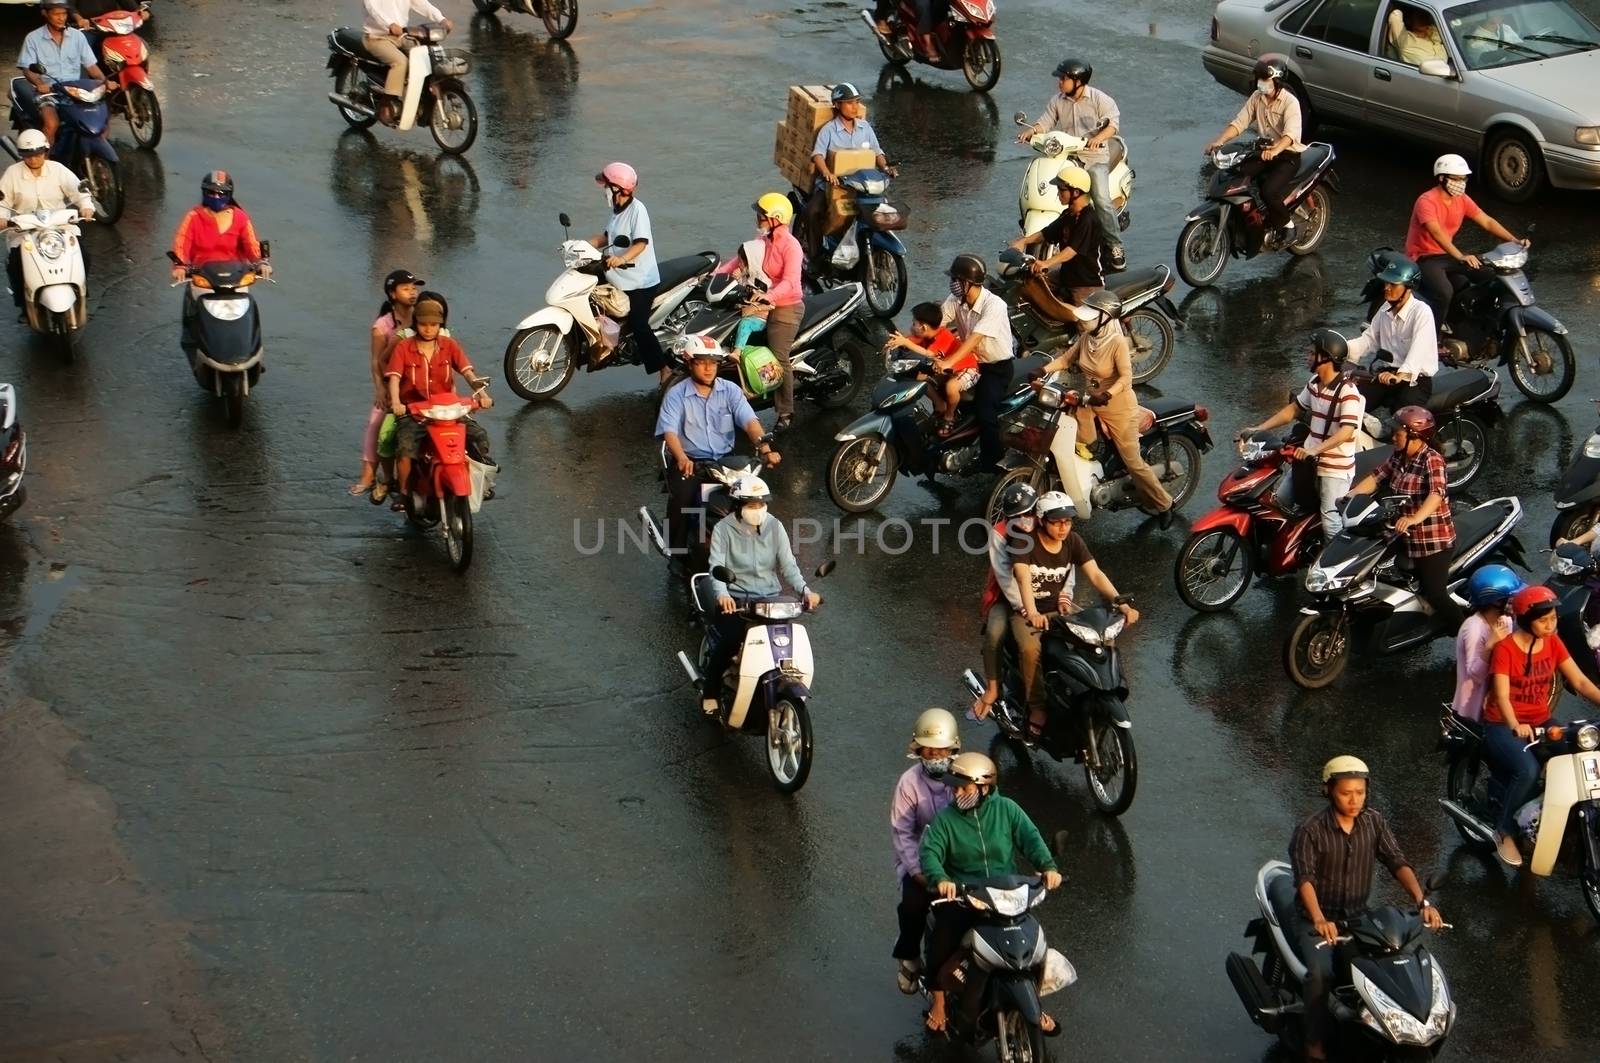 HO CHI MINH, VIET NAM, ASIA- NOV 22: Group of people wear helmet, ride motorbike moving on street in rush hour, they pass by make chaotic traffice in Ho Chi Minh city, Vietnam, Asia on Dec 15, 2012